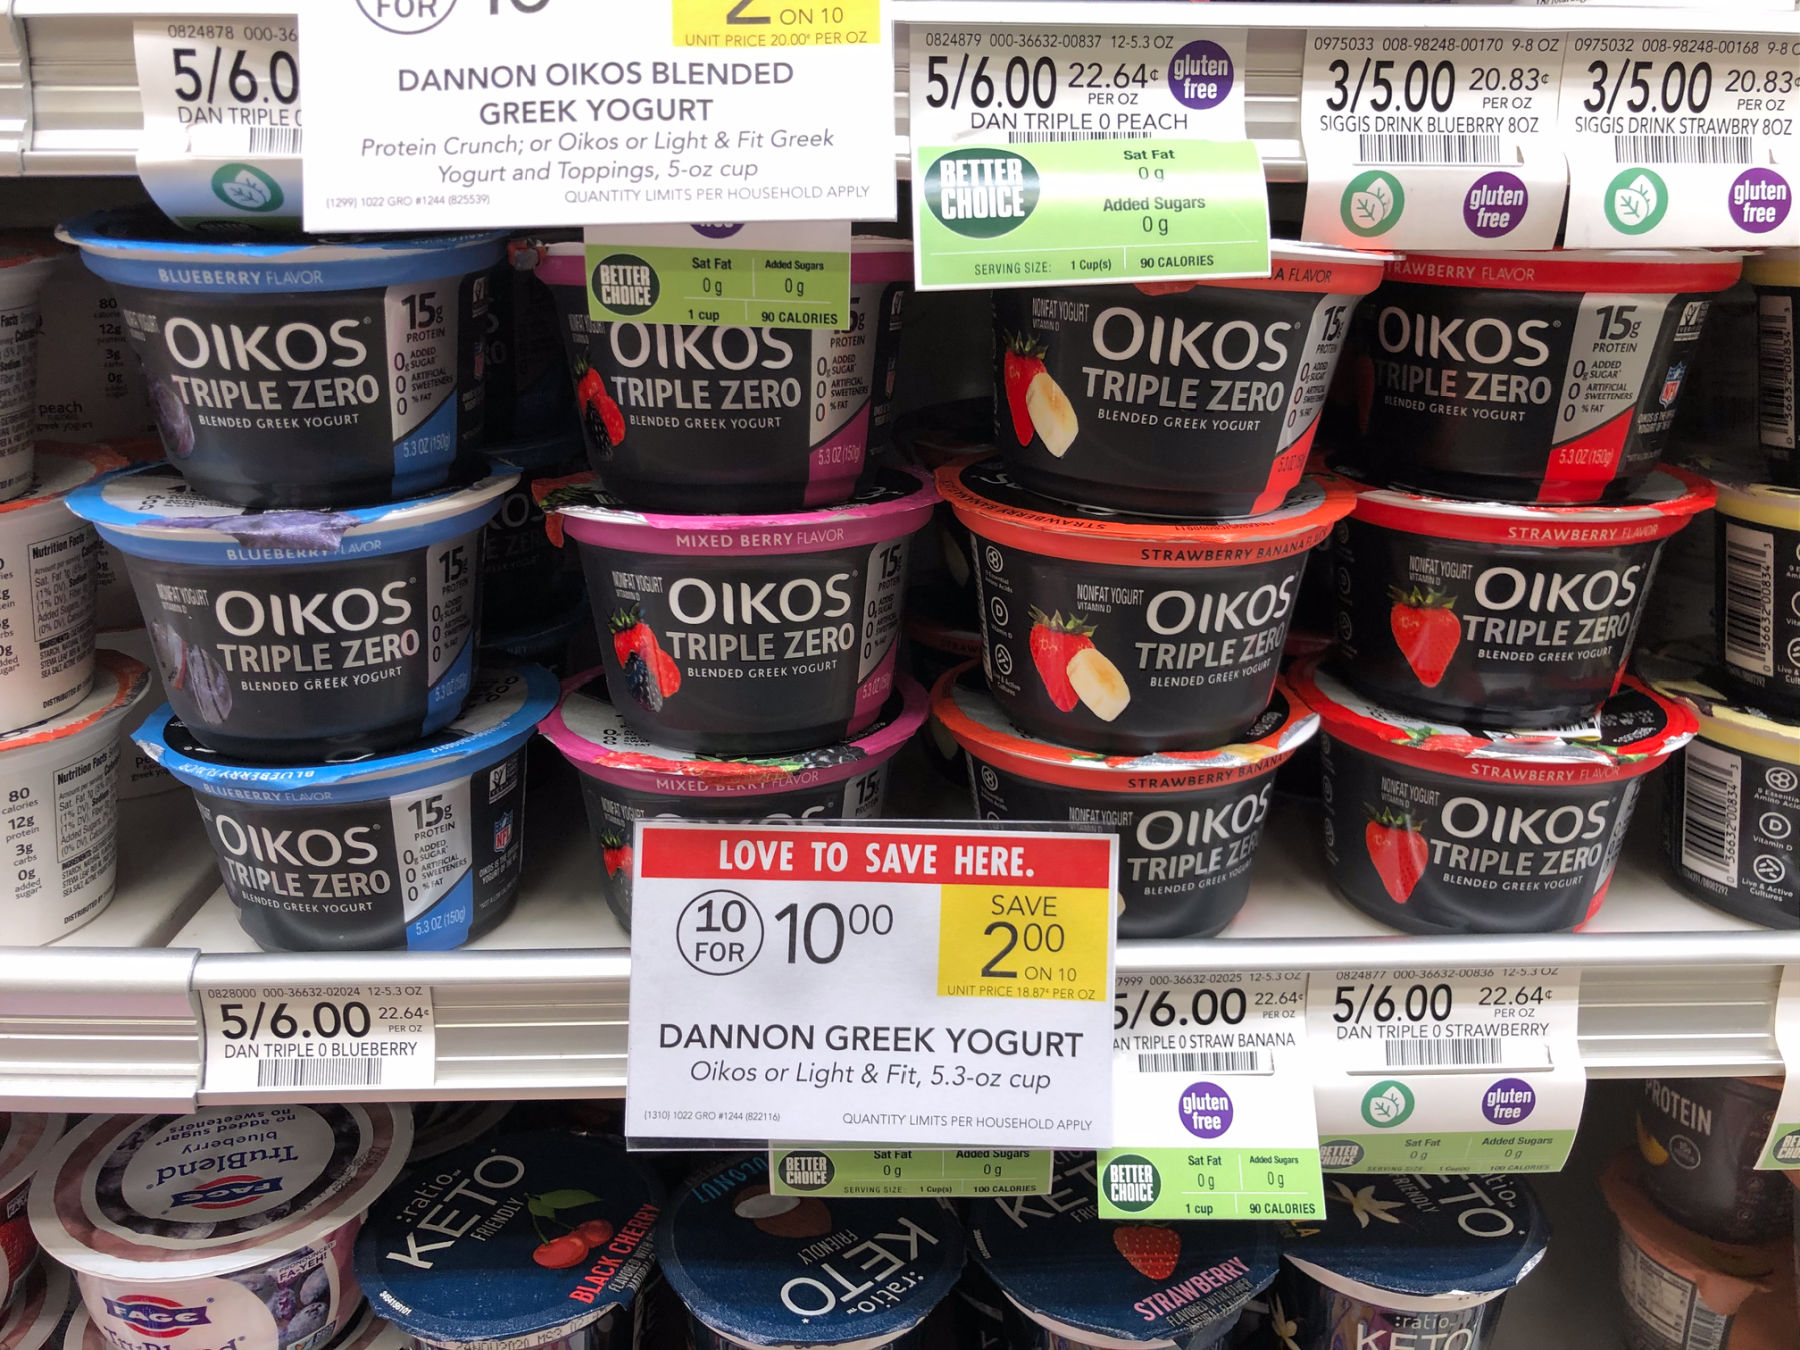 Look For Delicious Dannon® Oikos® Triple Zero On Sale NOW At Pu on I Heart Publix